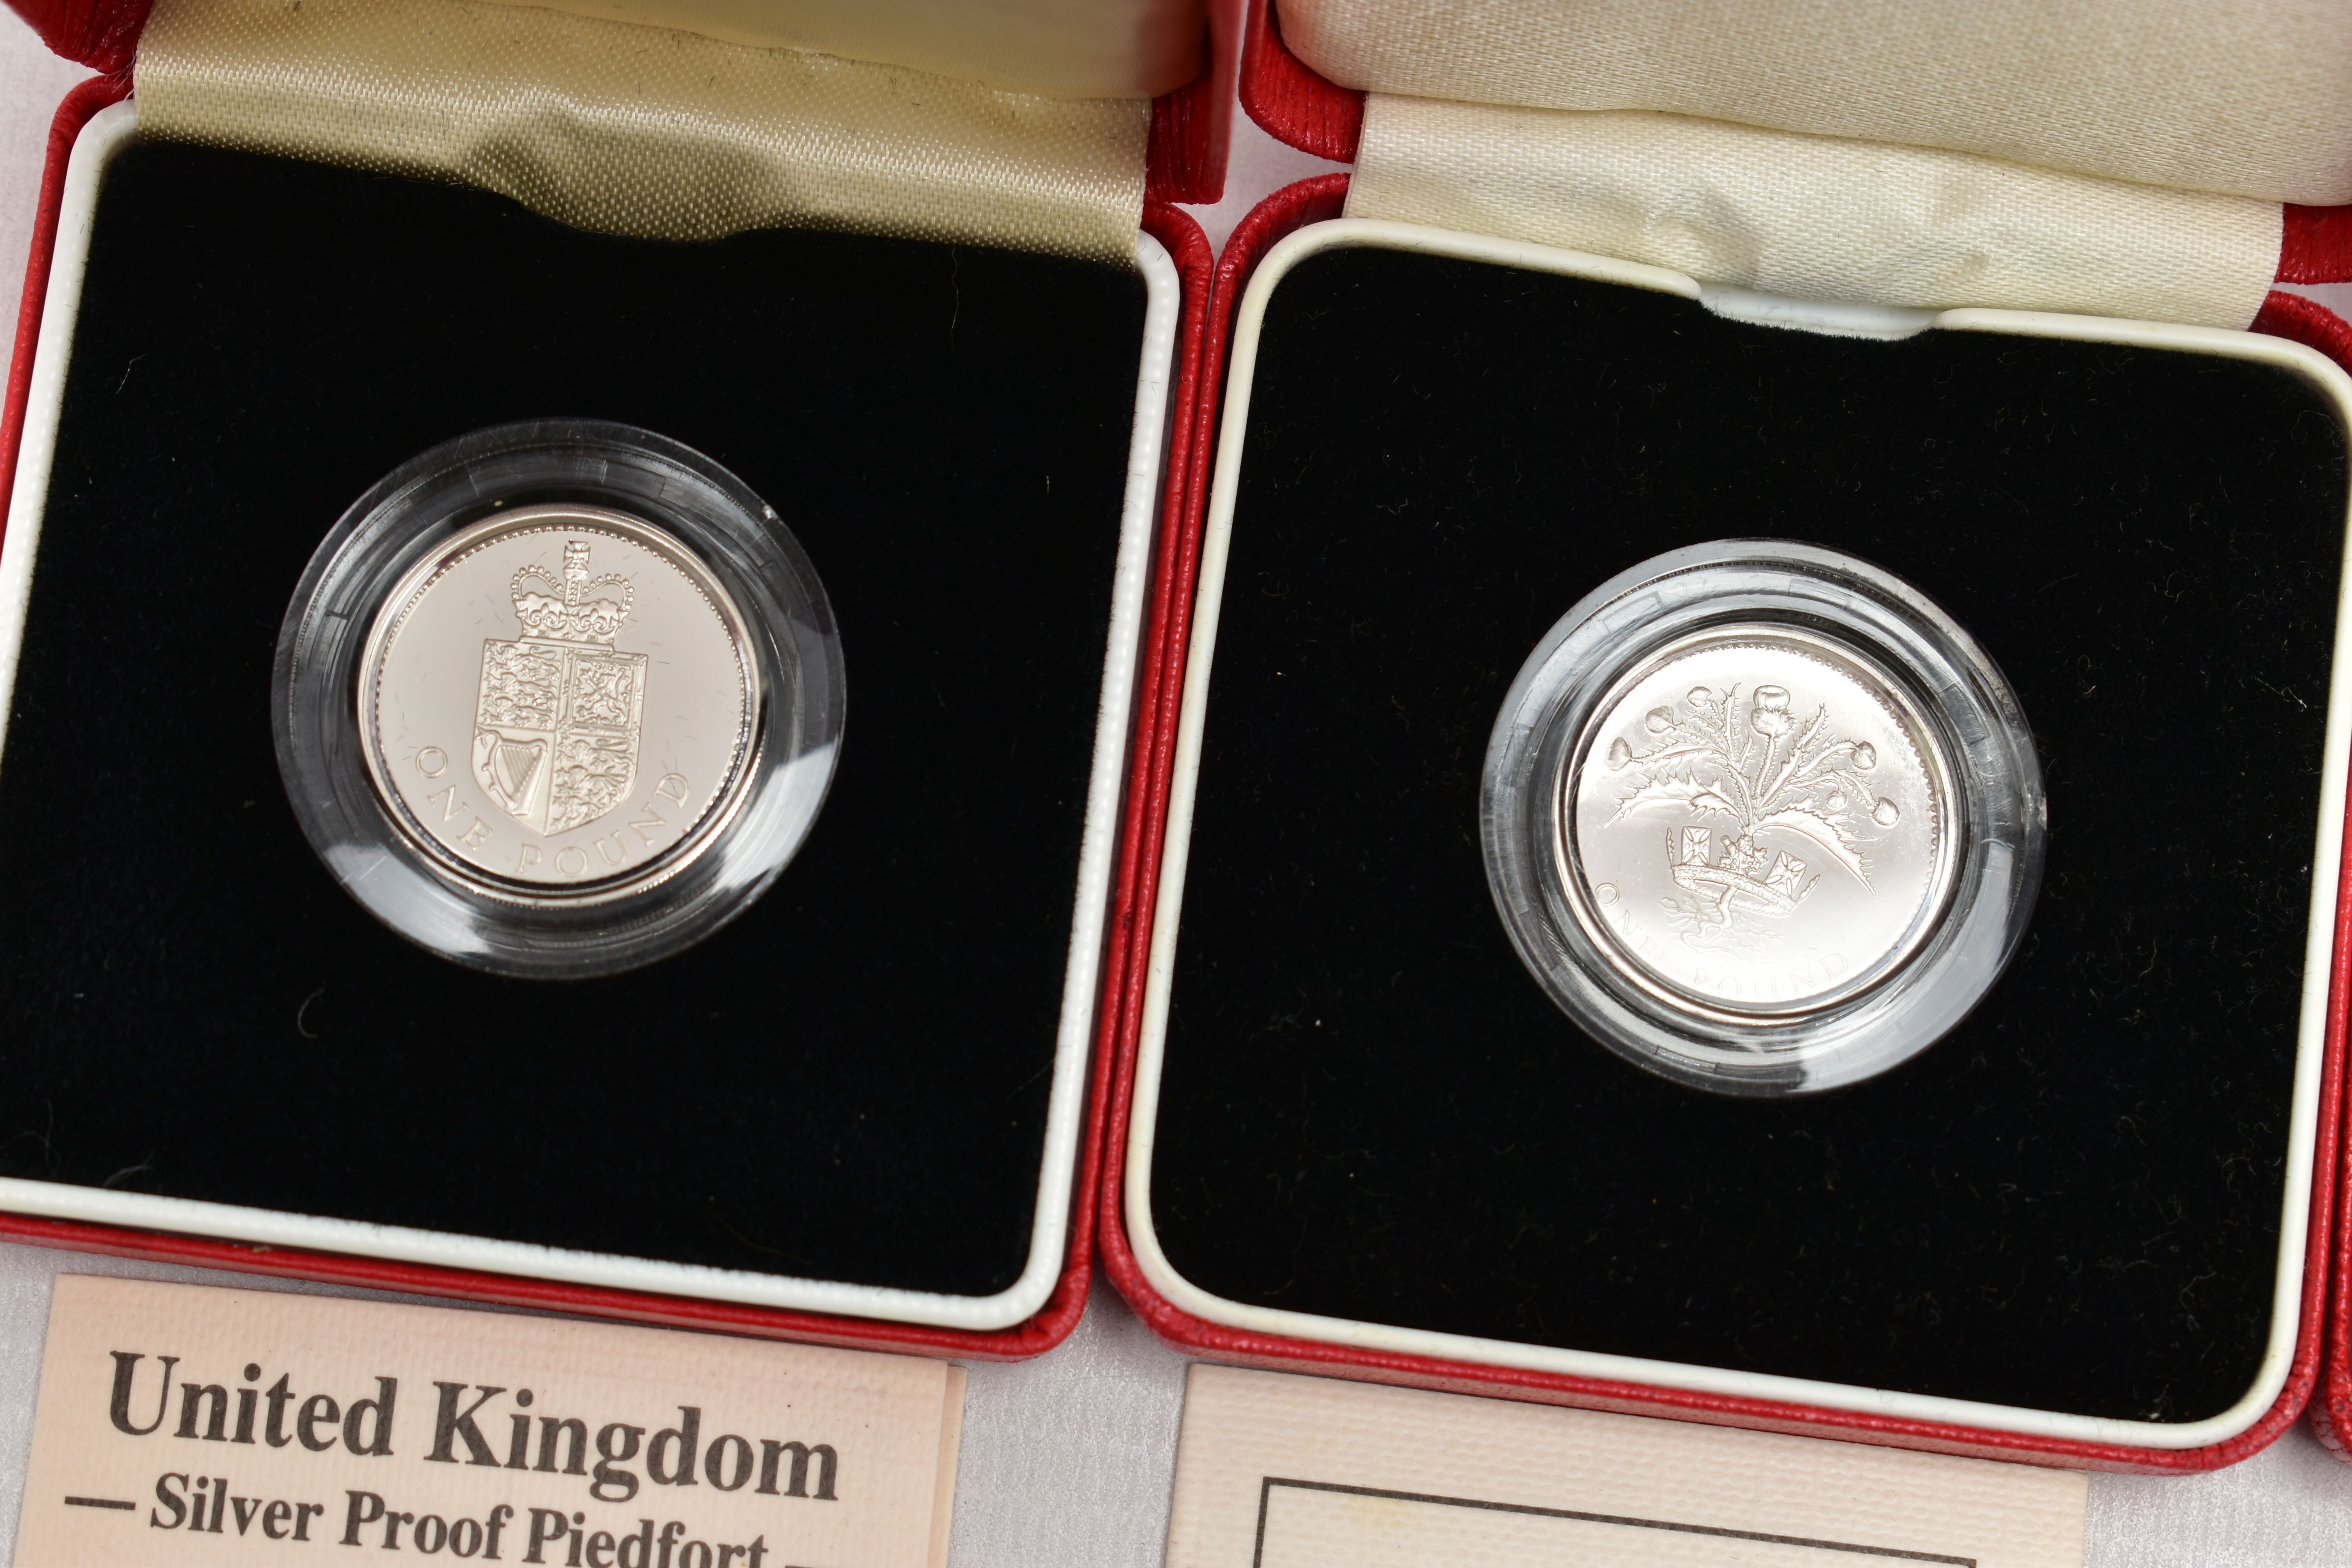 ROYAL MINT PIEDFORT SILVER PROOF ONE POUND BOXED COINS, 1987, 1988, 1989, all contain certificates - Image 2 of 3